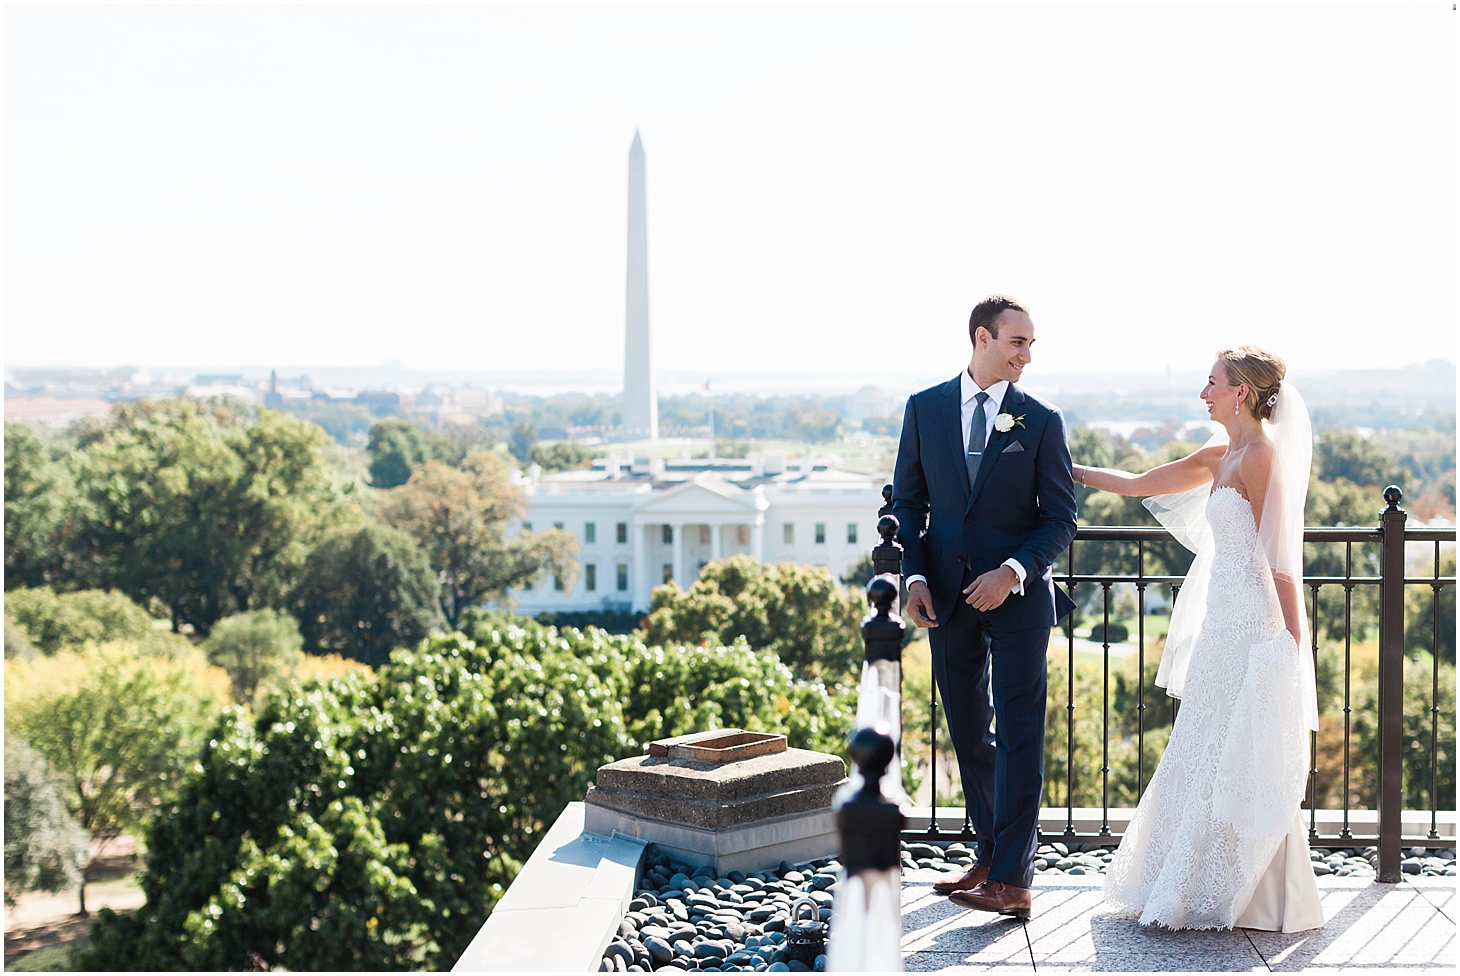 First Look at The Top of the Hay, Industrial-Chic Wedding at Long View Gallery in DC, Sarah Bradshaw Photography, DC Wedding Photographer